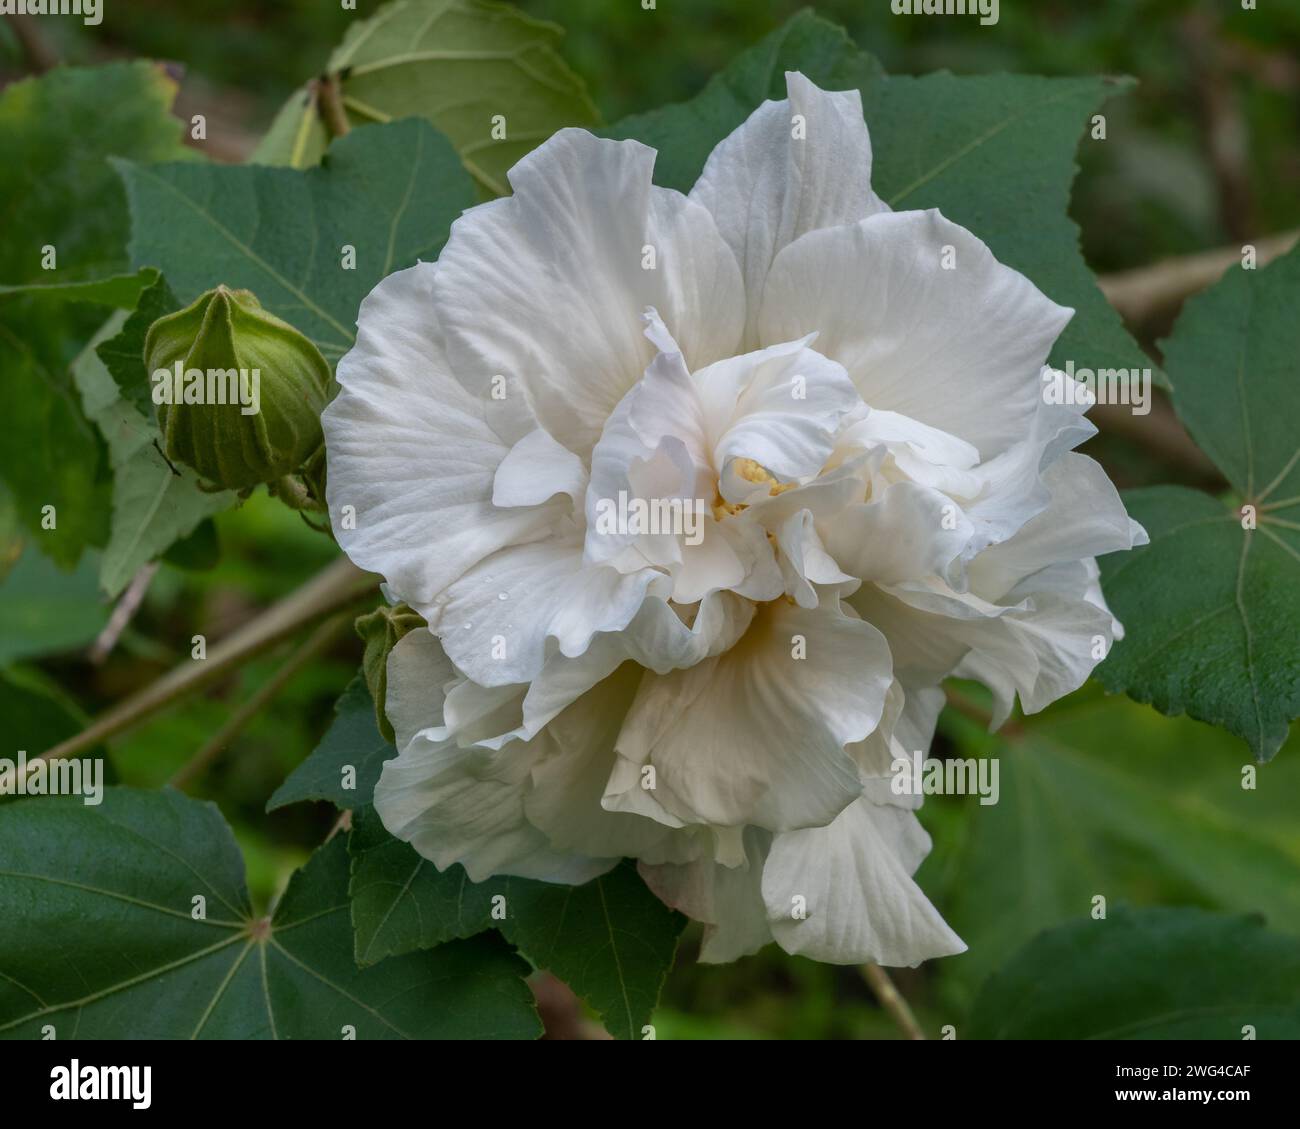 Closeup view of beautiful white hibiscus mutabilis aka Confederate rose or Dixie rosemallow flower and bud in garden outdoors on natural background Stock Photo